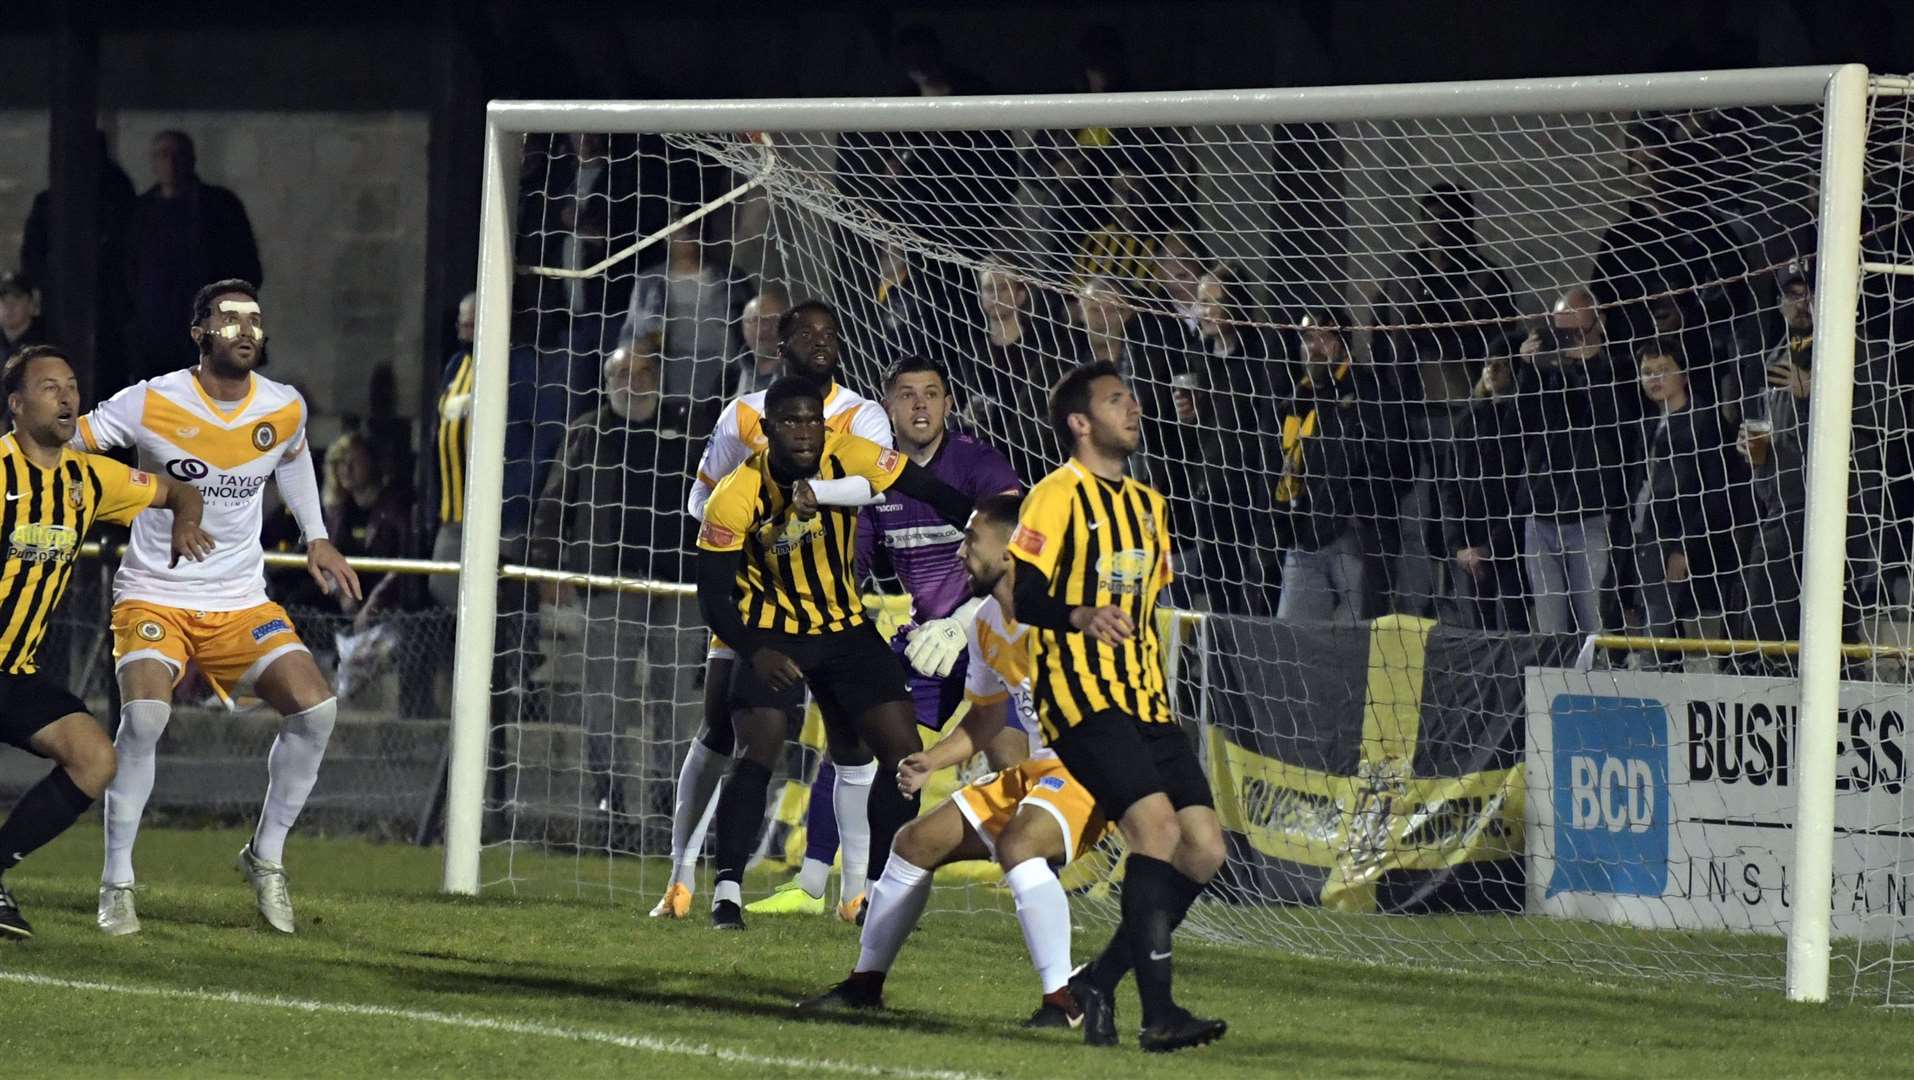 You can buy a season ticket at Folkestone Invicta for £180. Picture: Barry Goodwin (48661245)